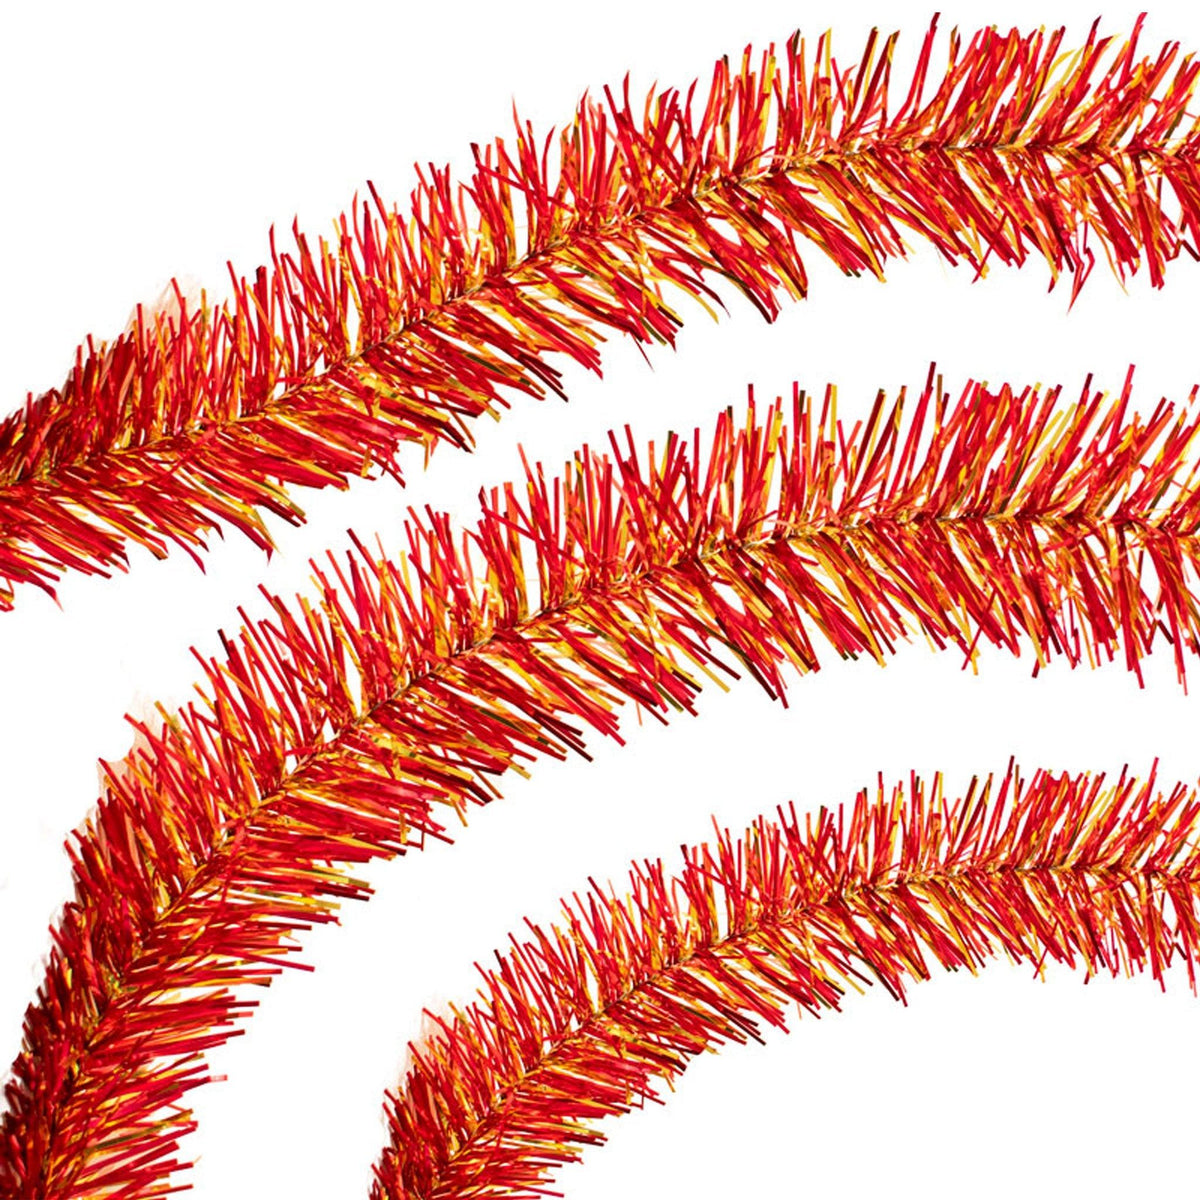 Lee Display's brand new 25ft Shiny Red and Gold Tinsel Garlands and Fringe Embellishments on sale now at leedisplay.com